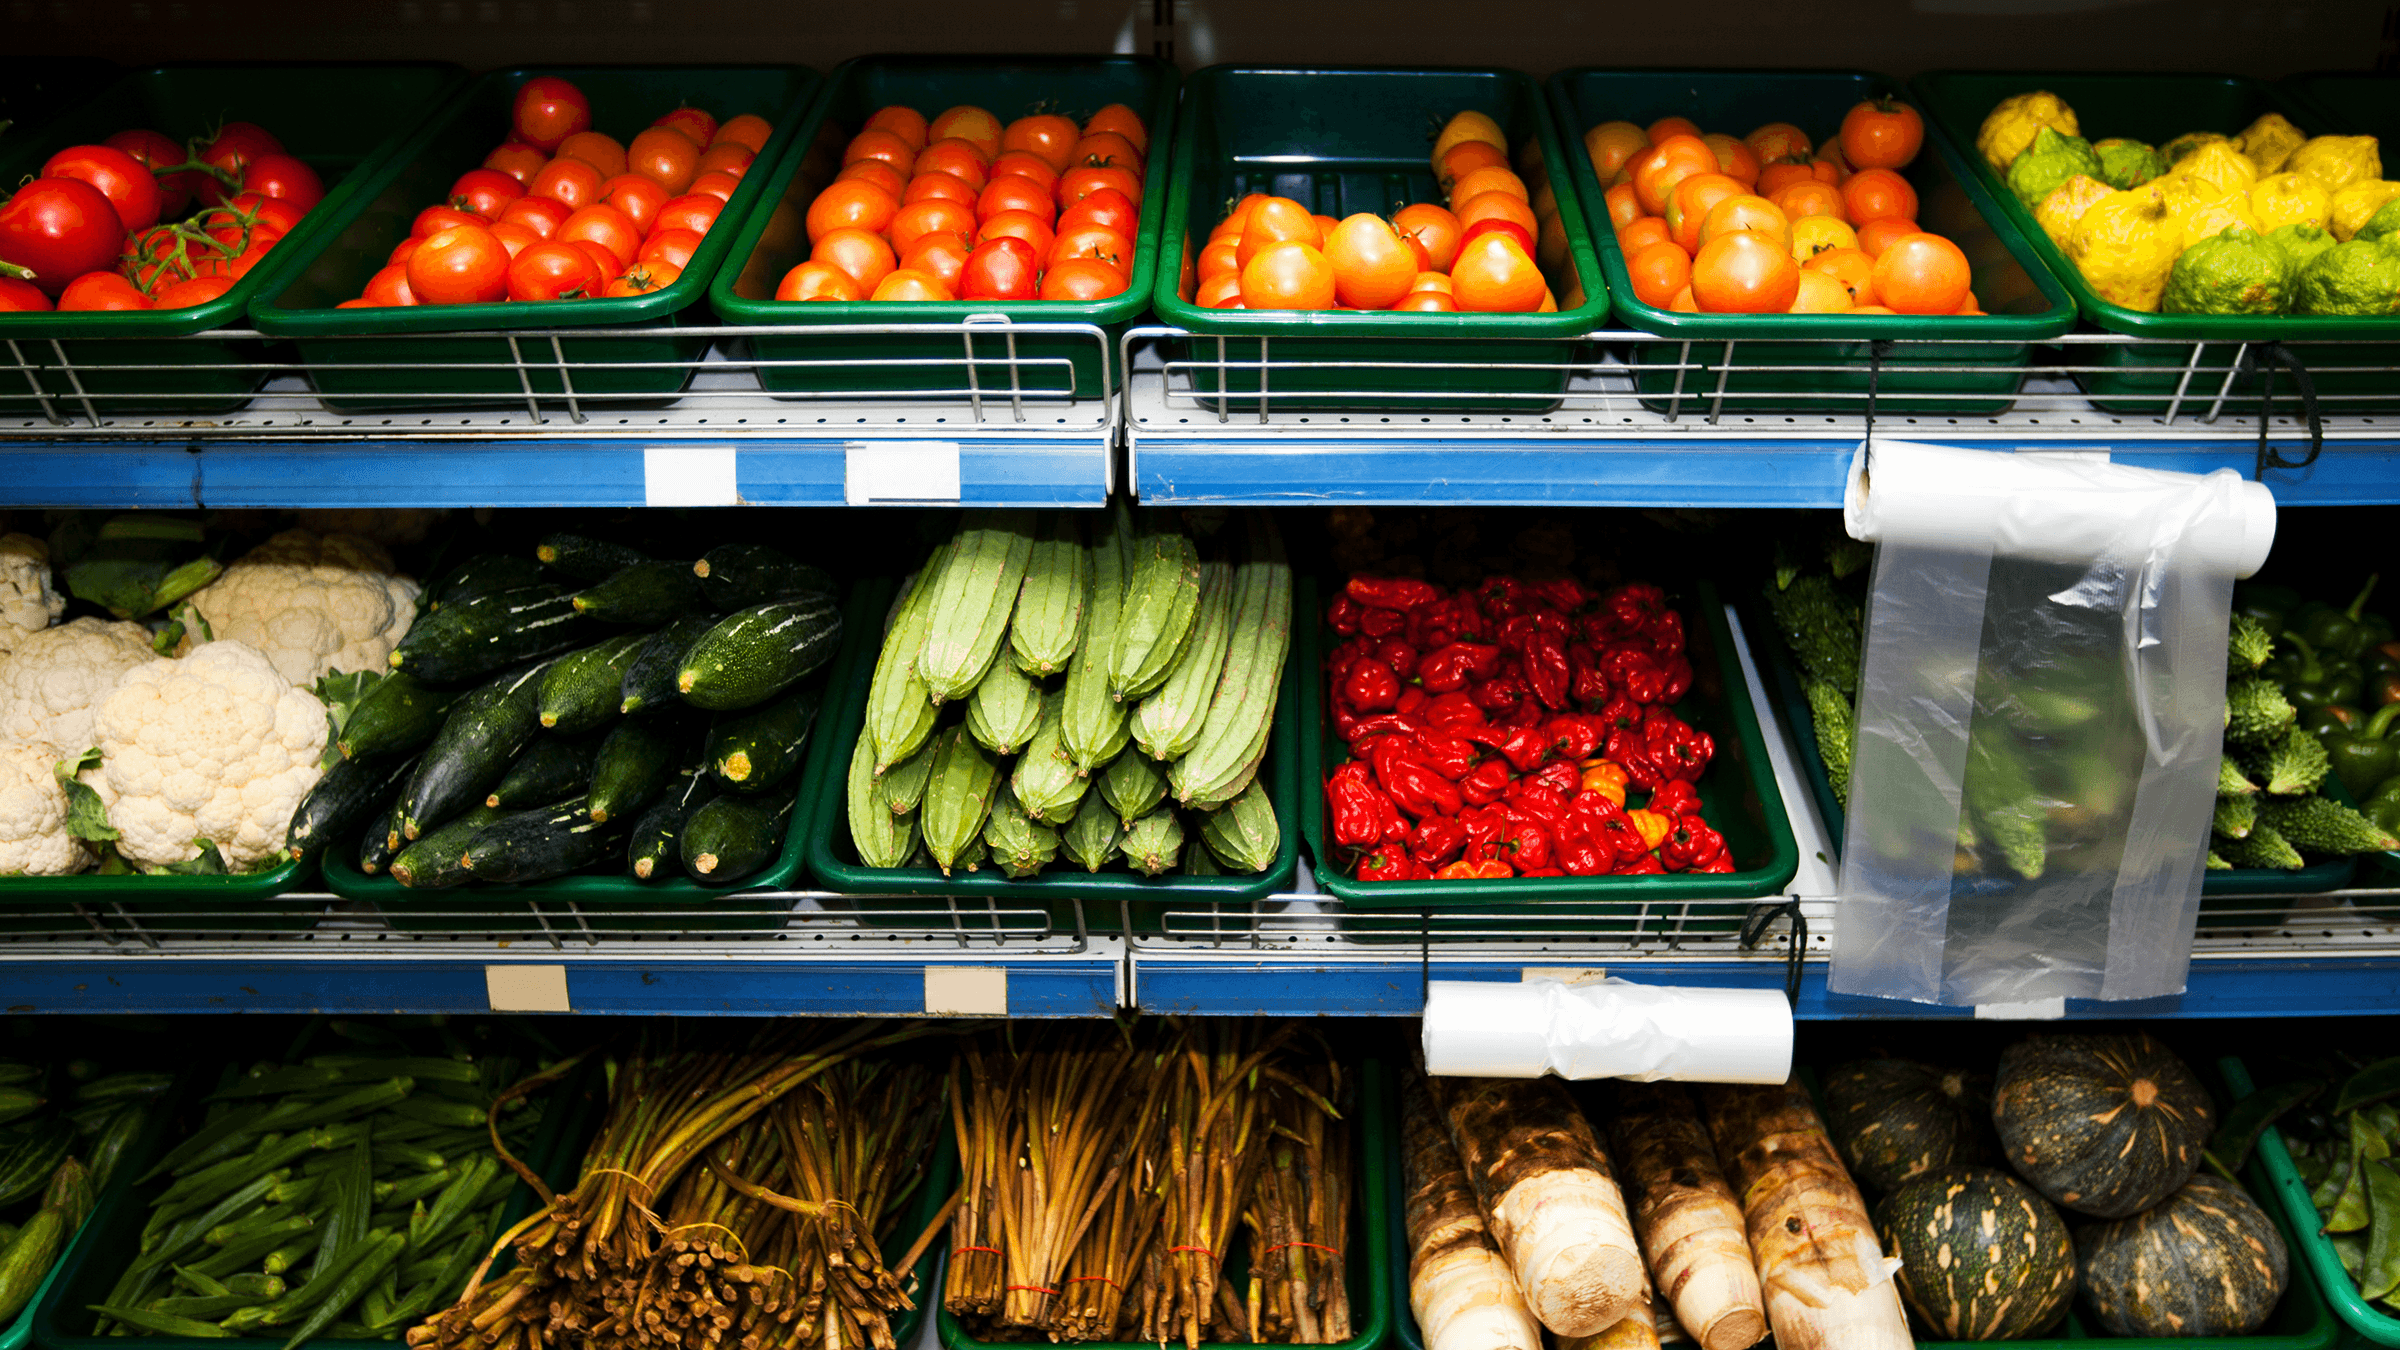 What are grocers doing to tackle food poverty?